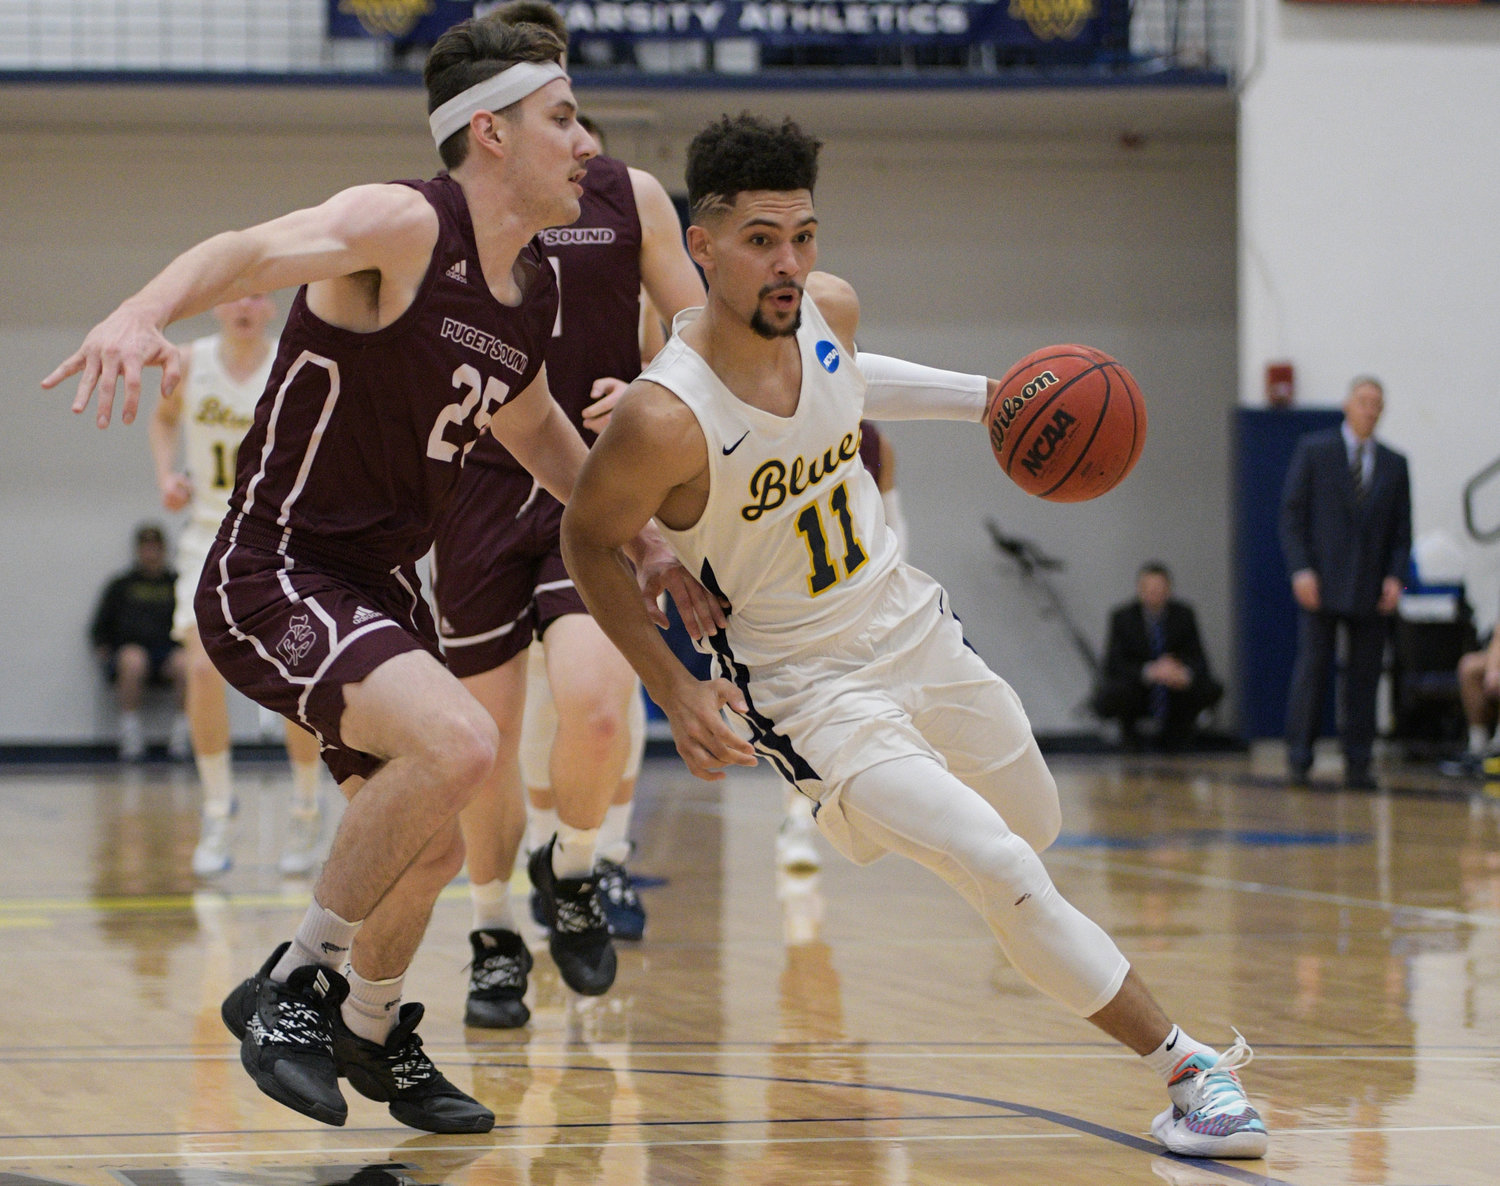 Whitman College senior guard Jaron Kirkley (11), has built himself into a starter after three seasons of limited playing time. (Courtesy of Whitman Athletics)